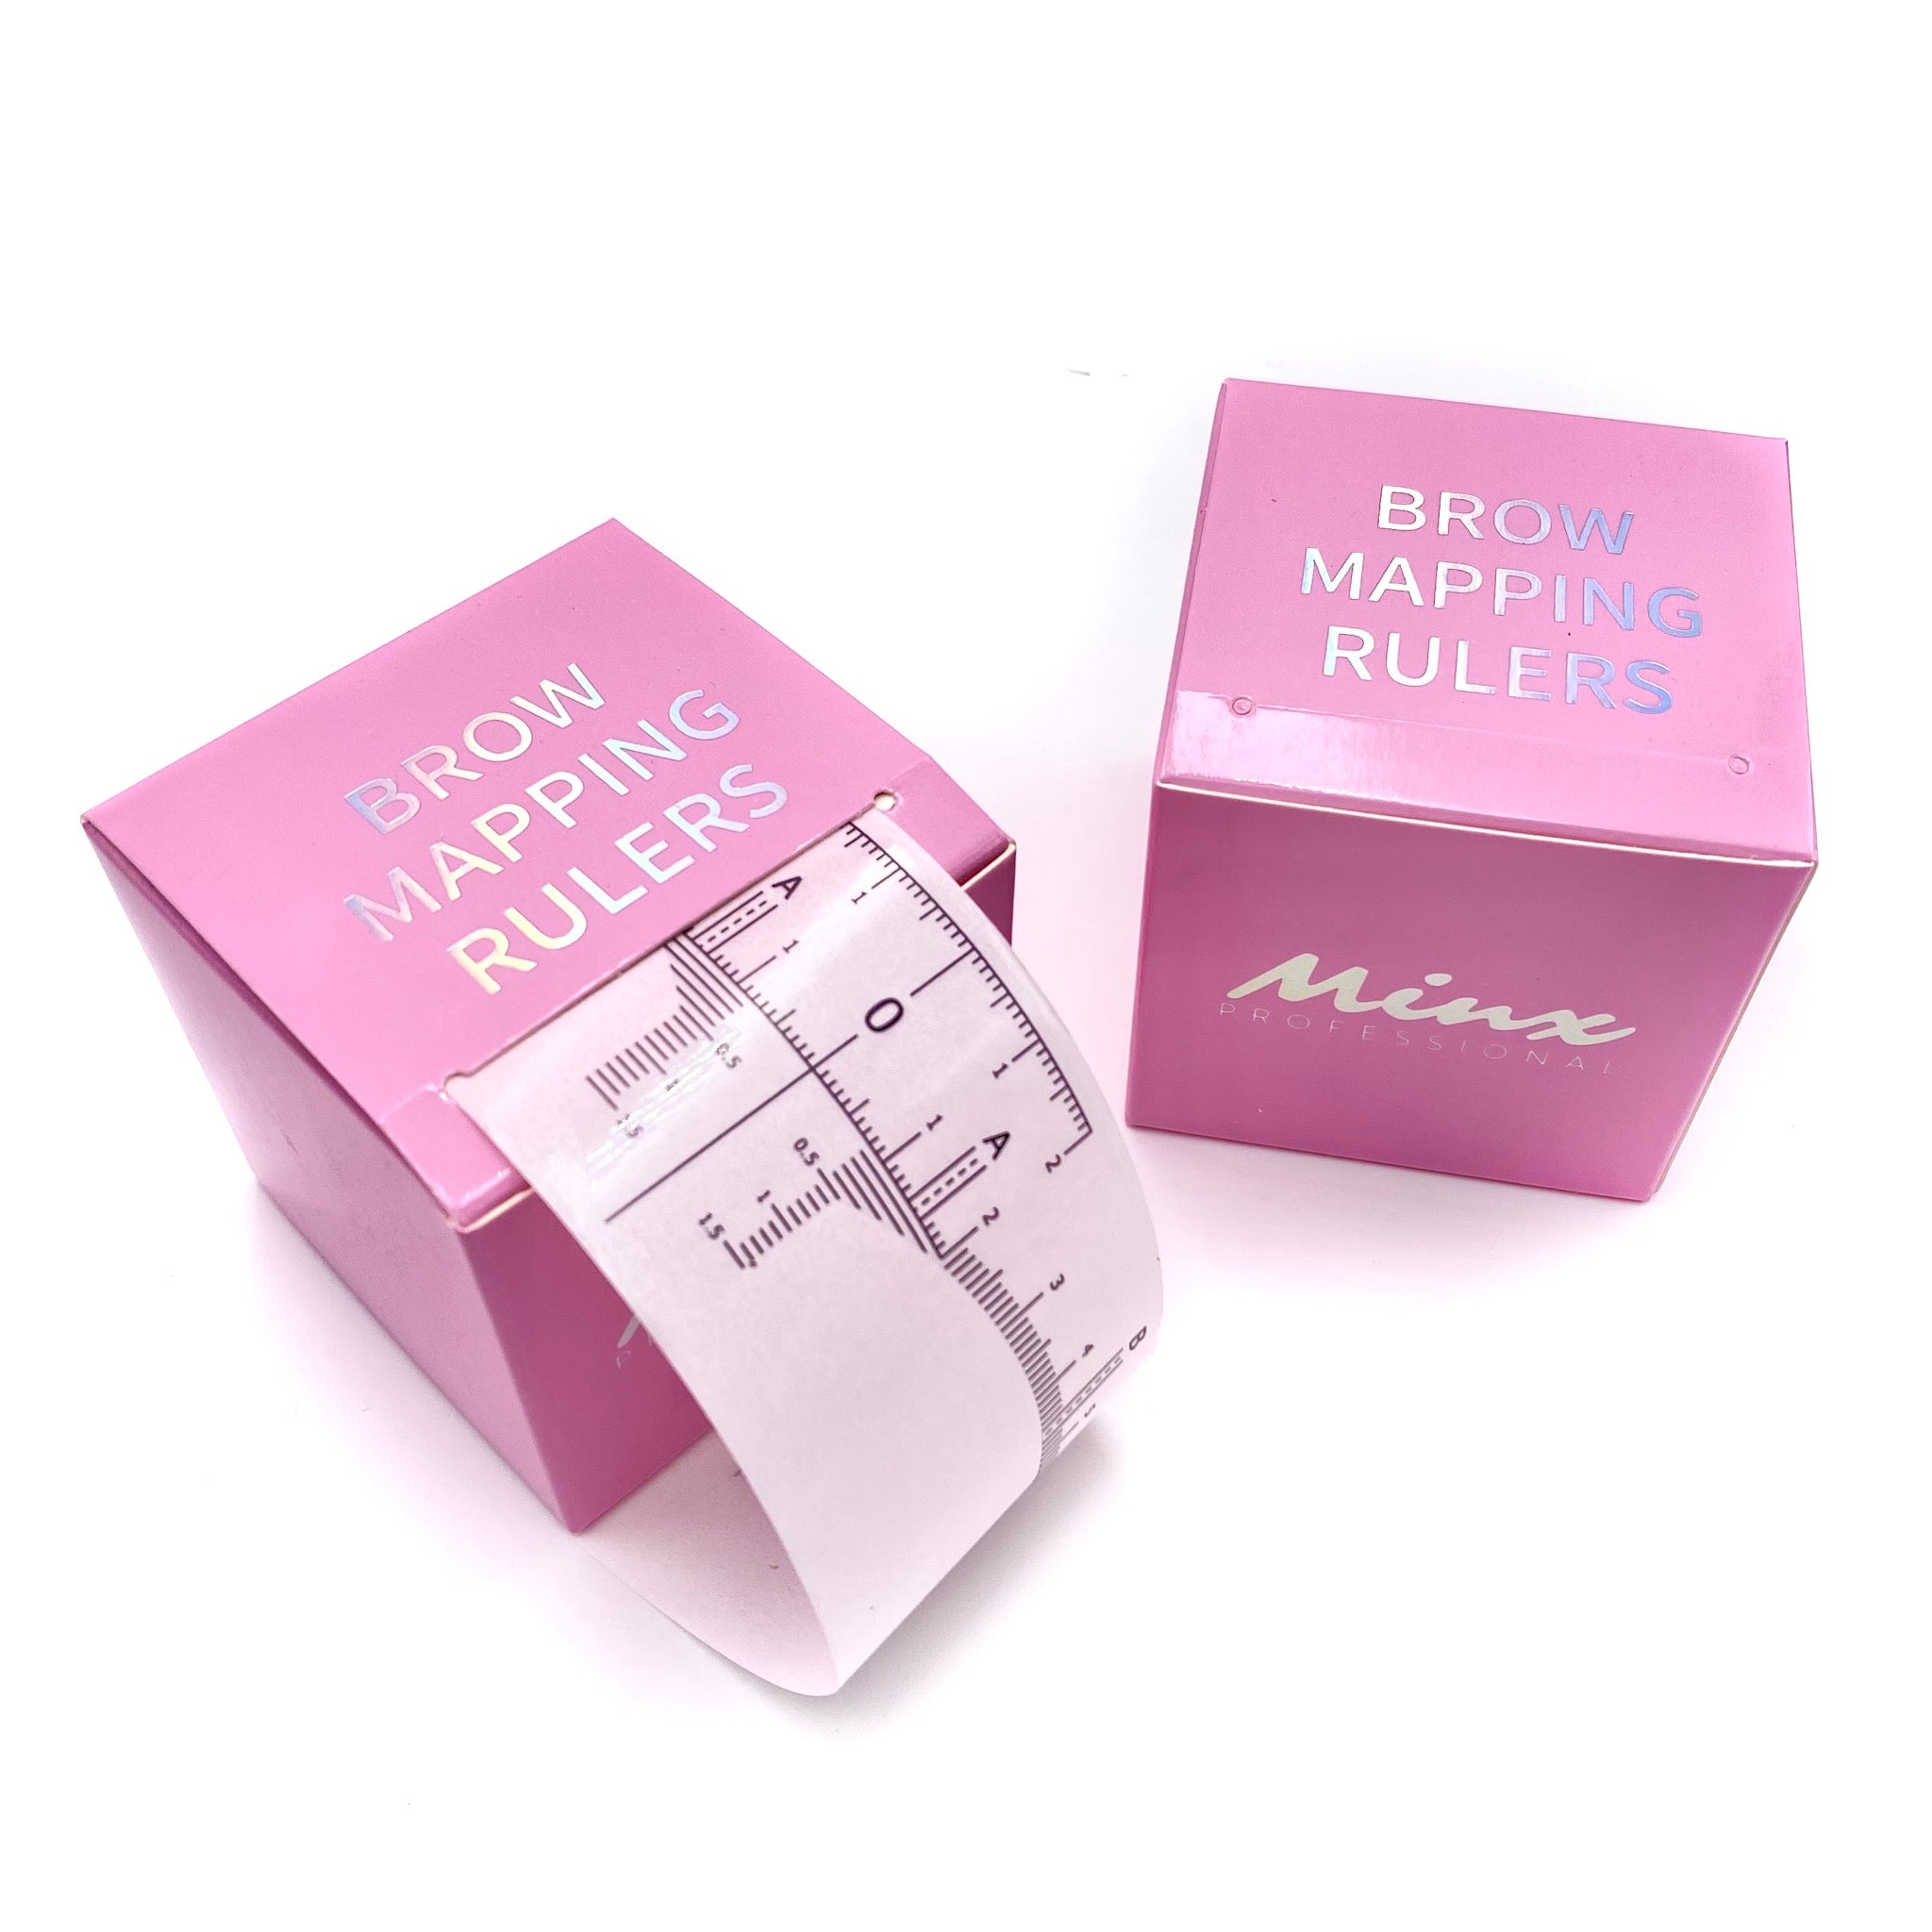 Brow Mapping Rulers 50 pcs Roll - PINK BOX